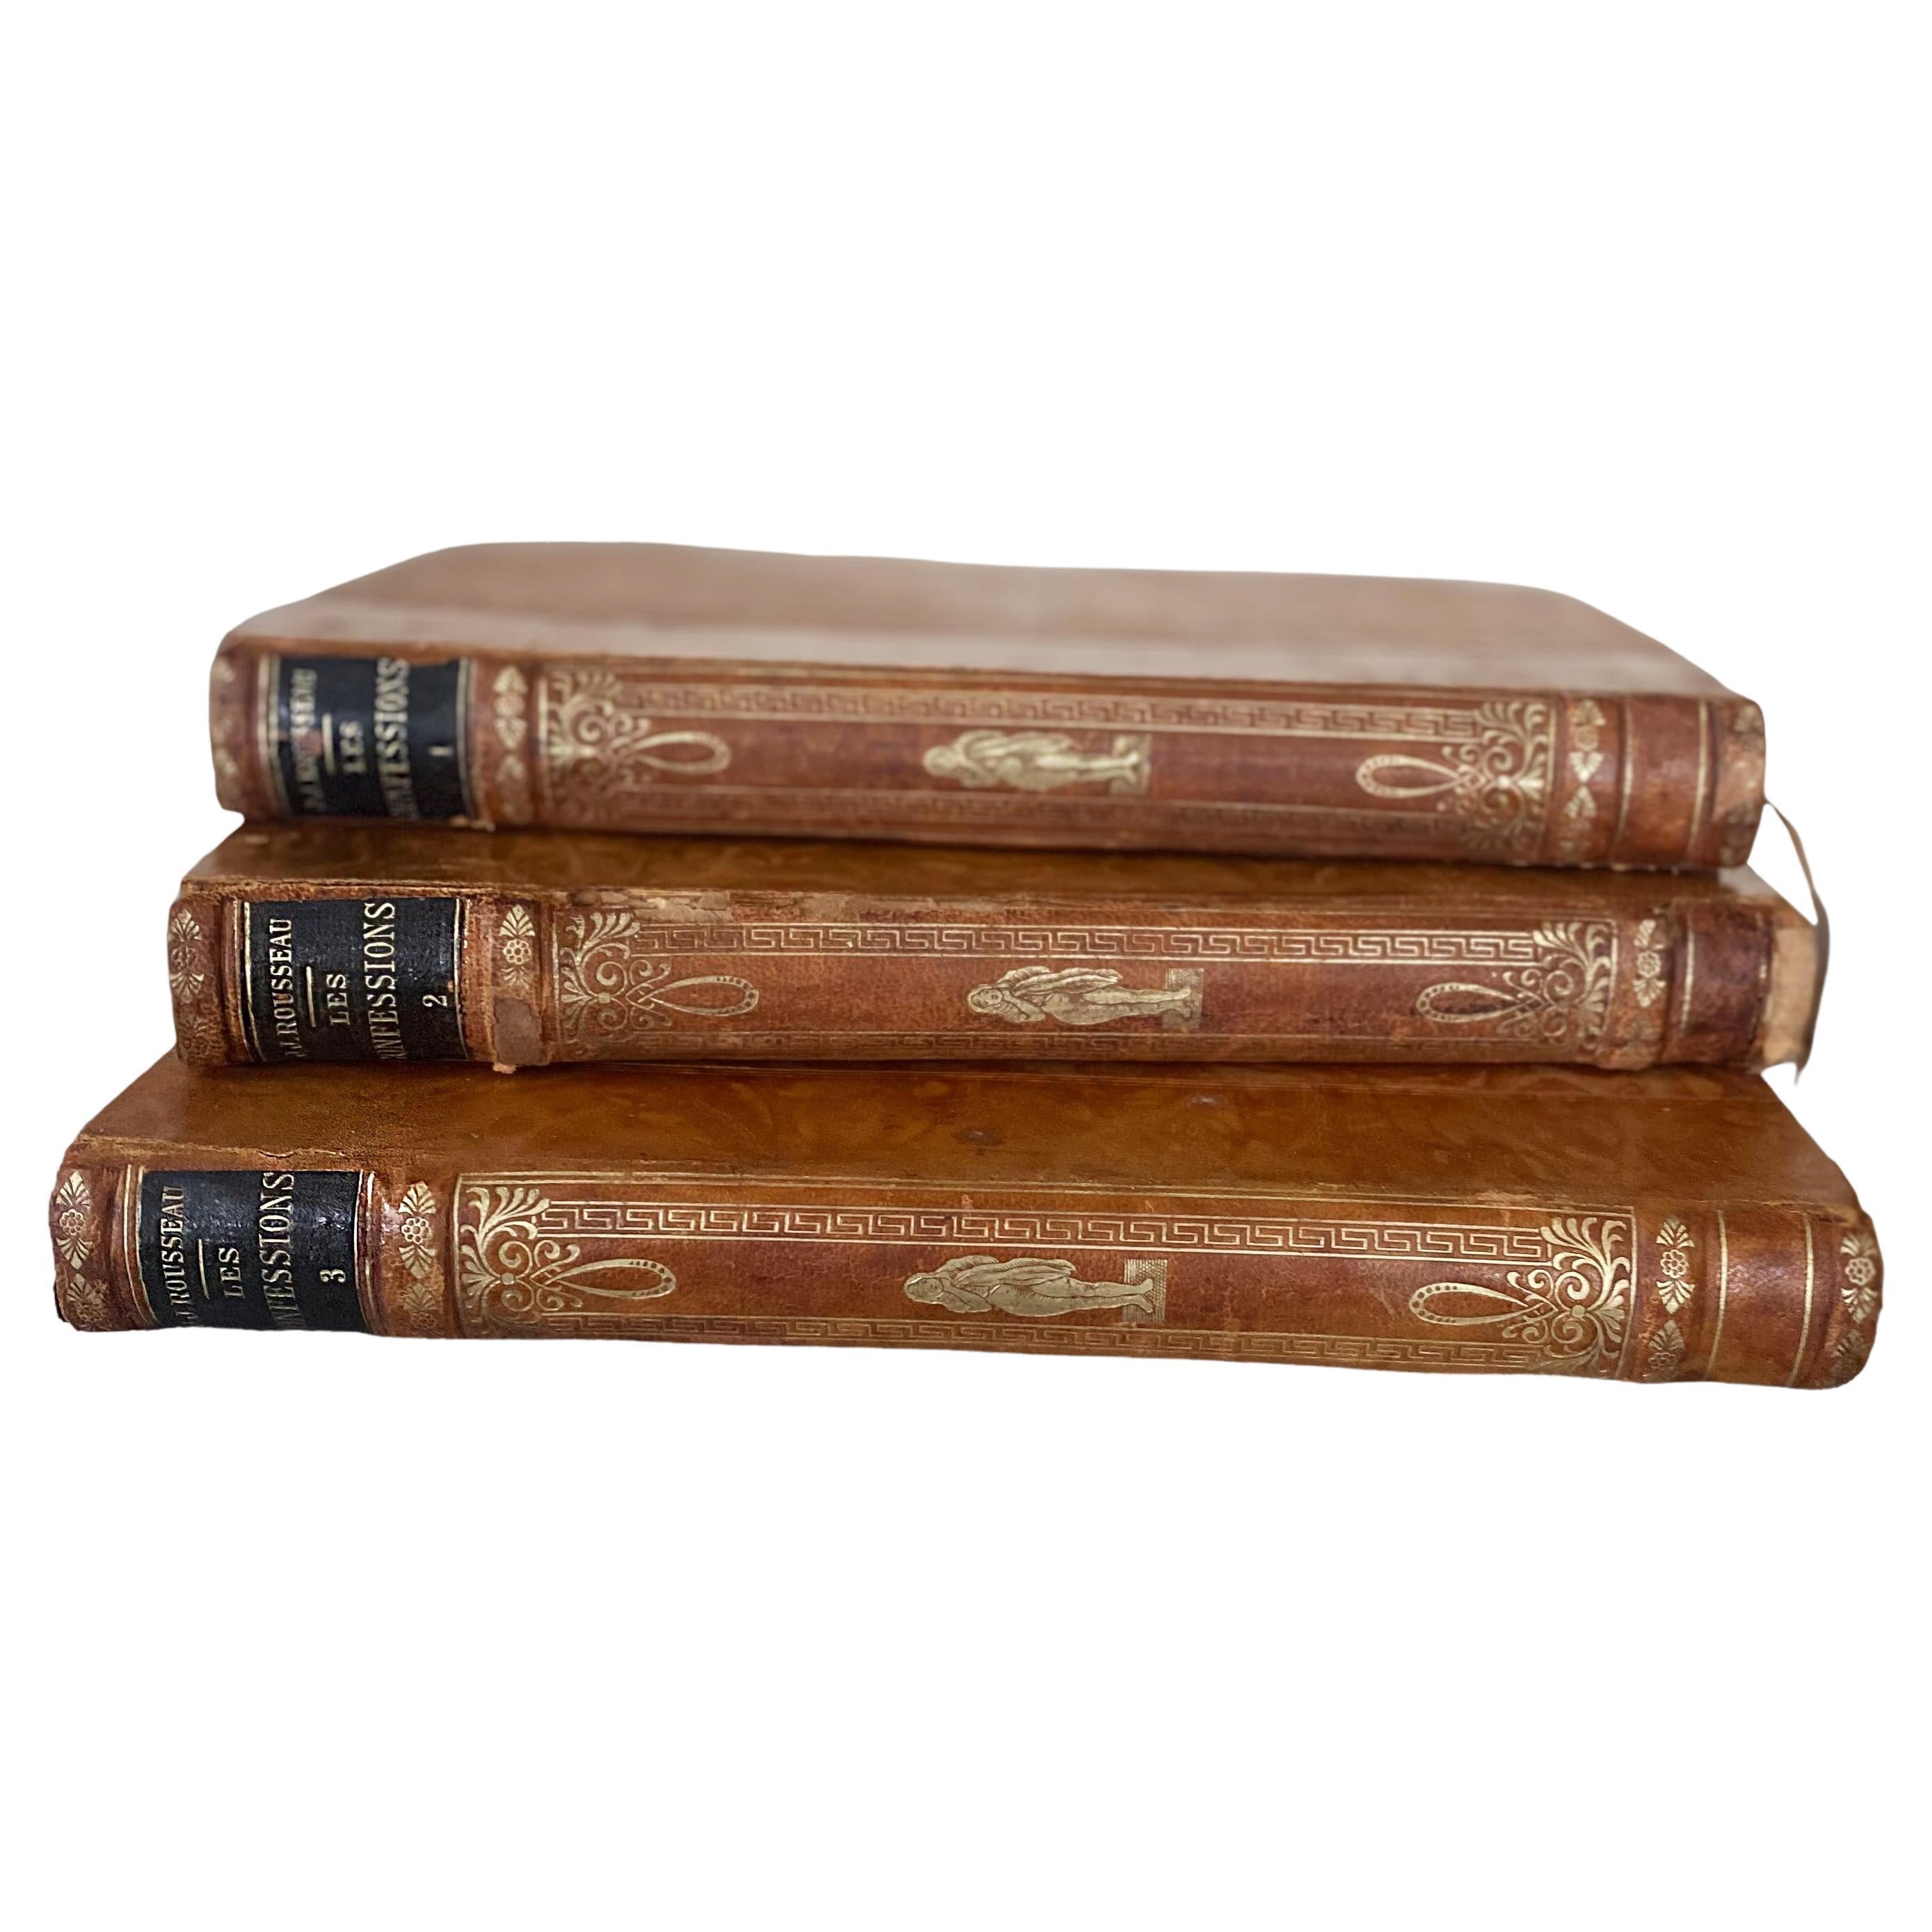 Les Confessions French Antique Books by J-J ROUSSEAU Leather Bound